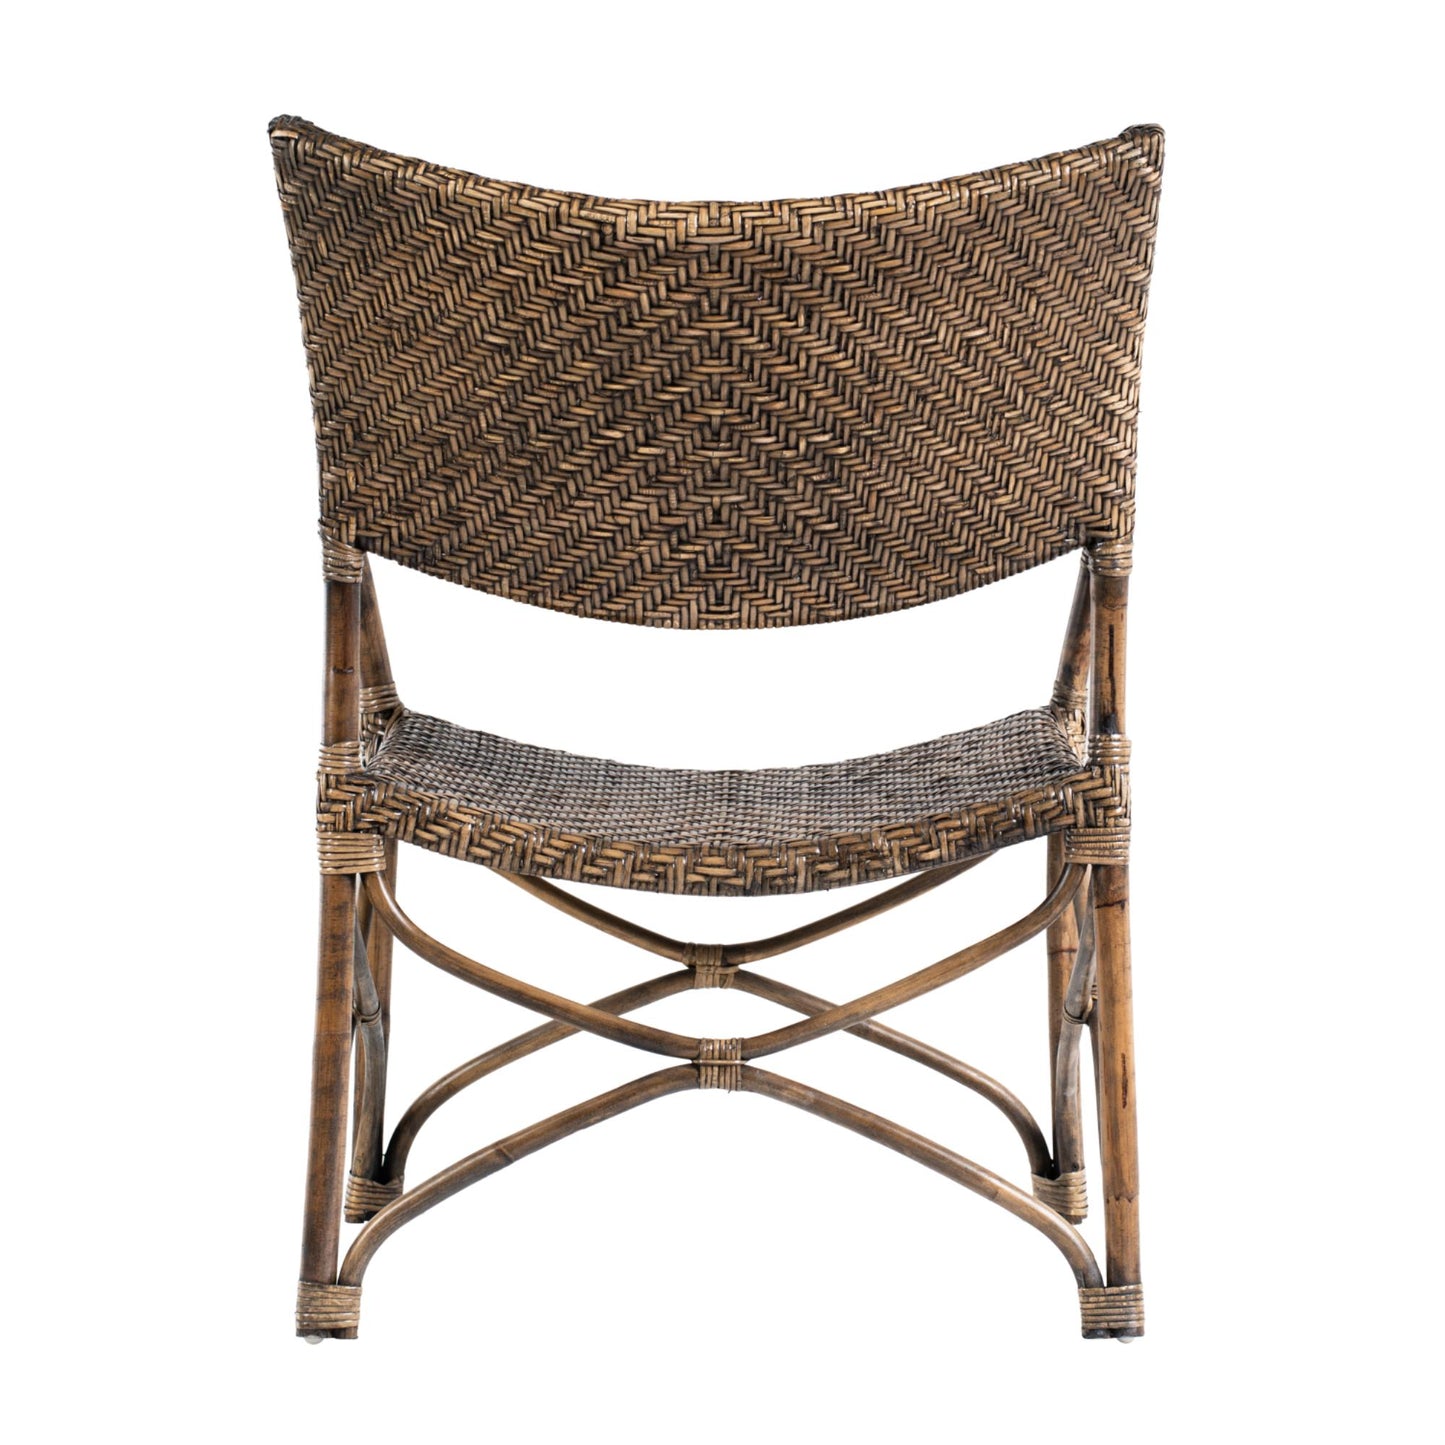 Wickerworks collection by Nova Solo.  Squire Chair (Set of 2) CasaFenix